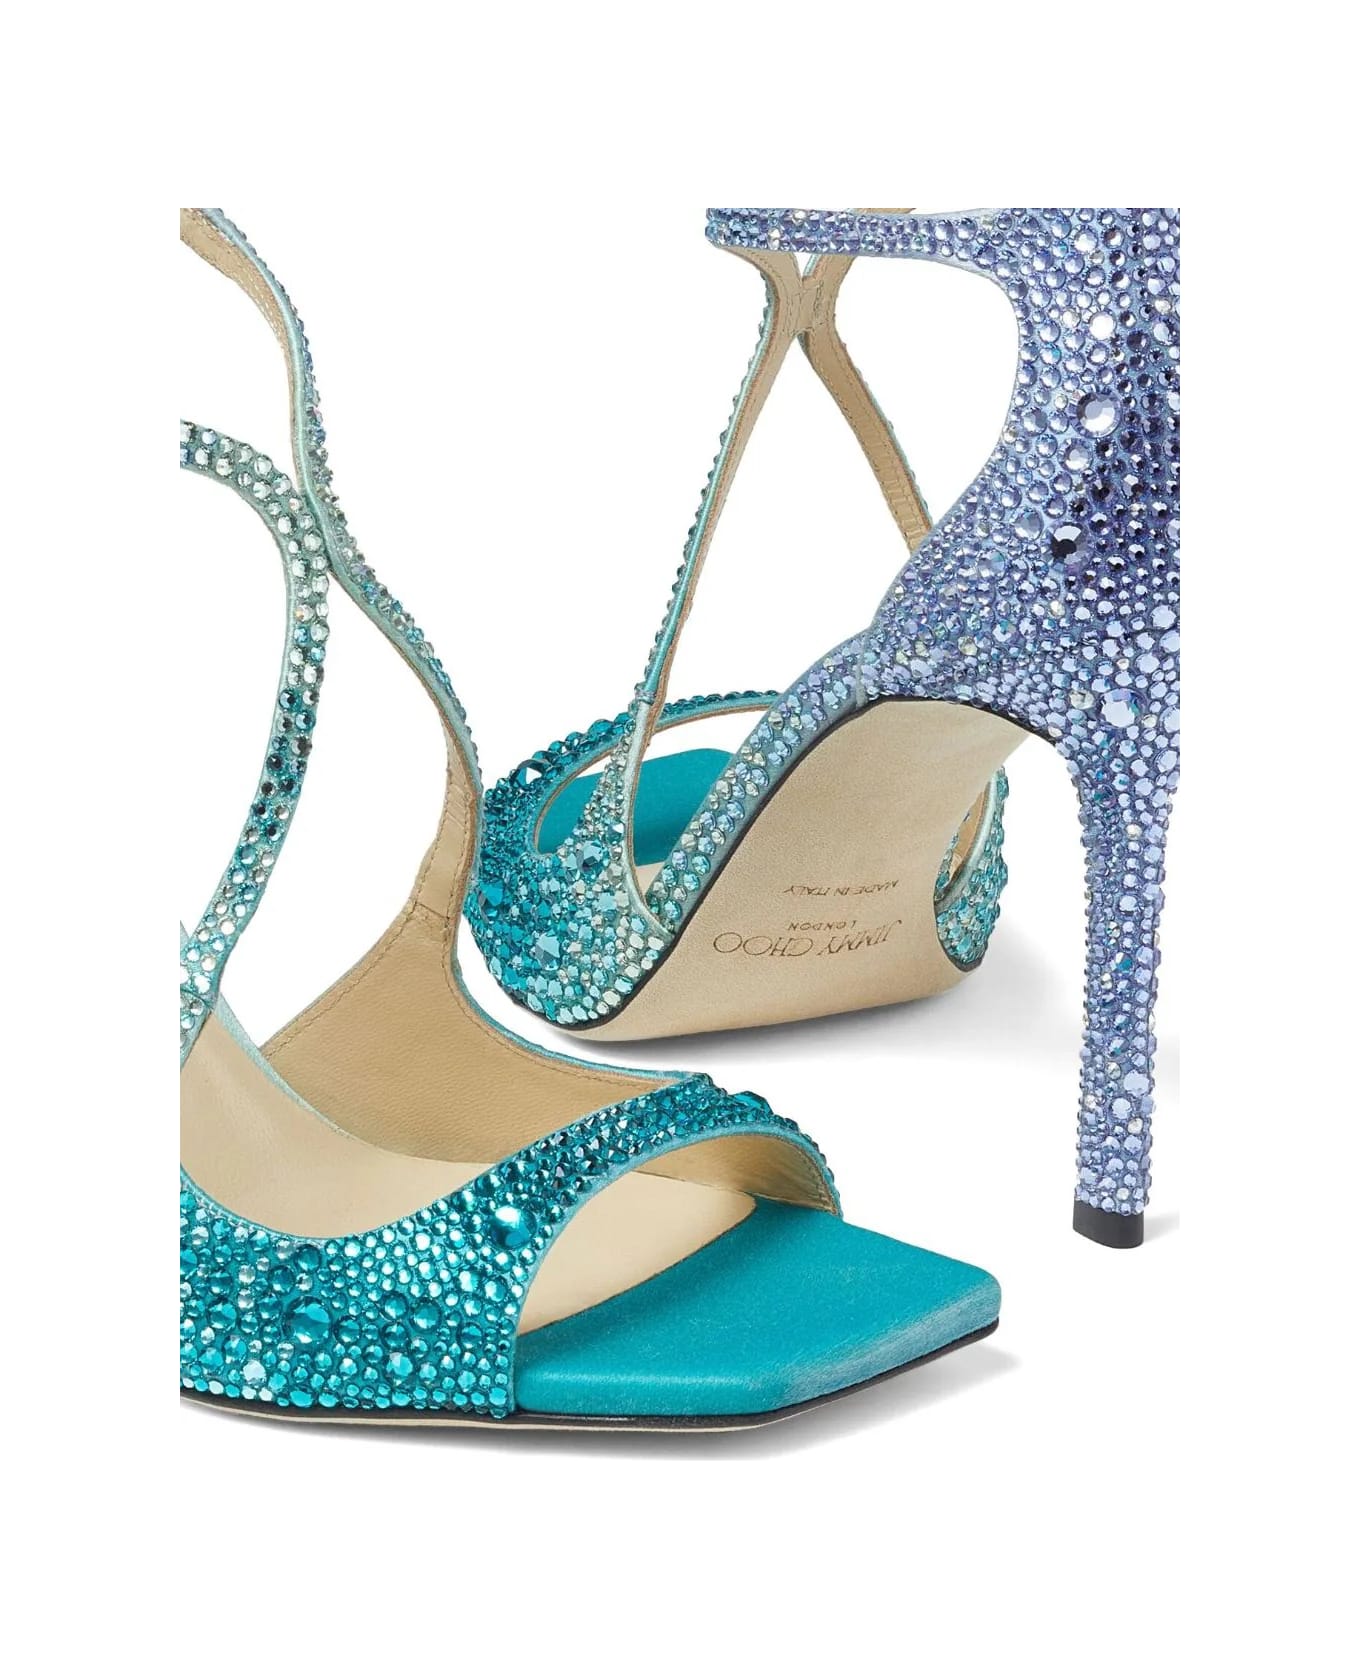 Jimmy Choo Azia 95 Sandal In Blue Peacock With Crystals - Blue サンダル